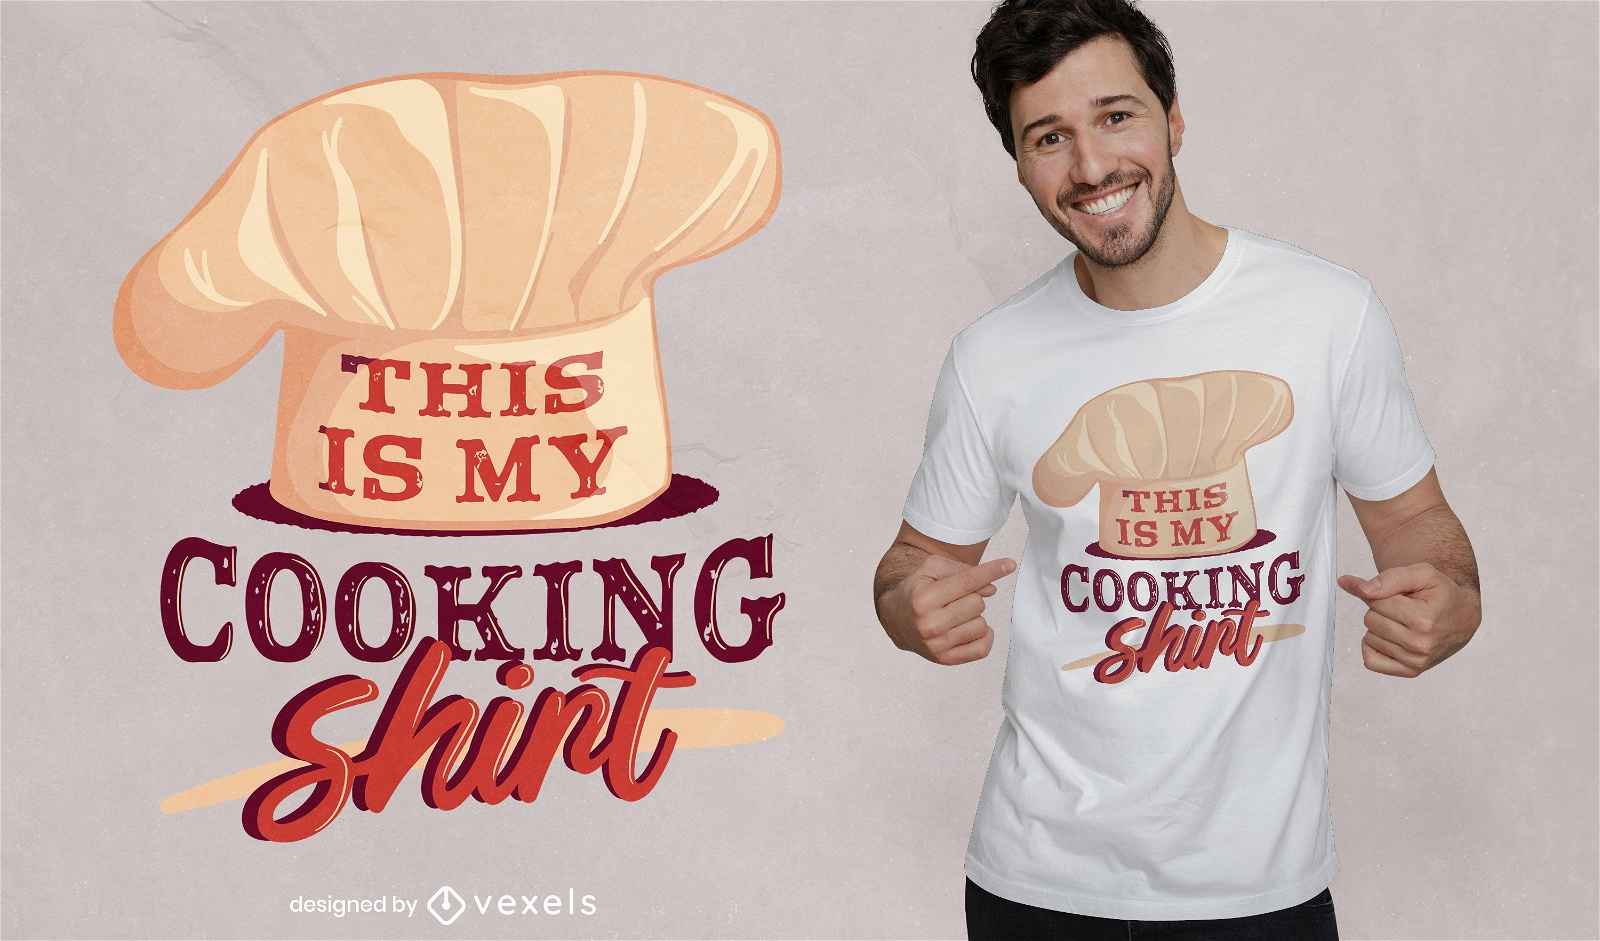 Awesome cooking shirt t-shirt design